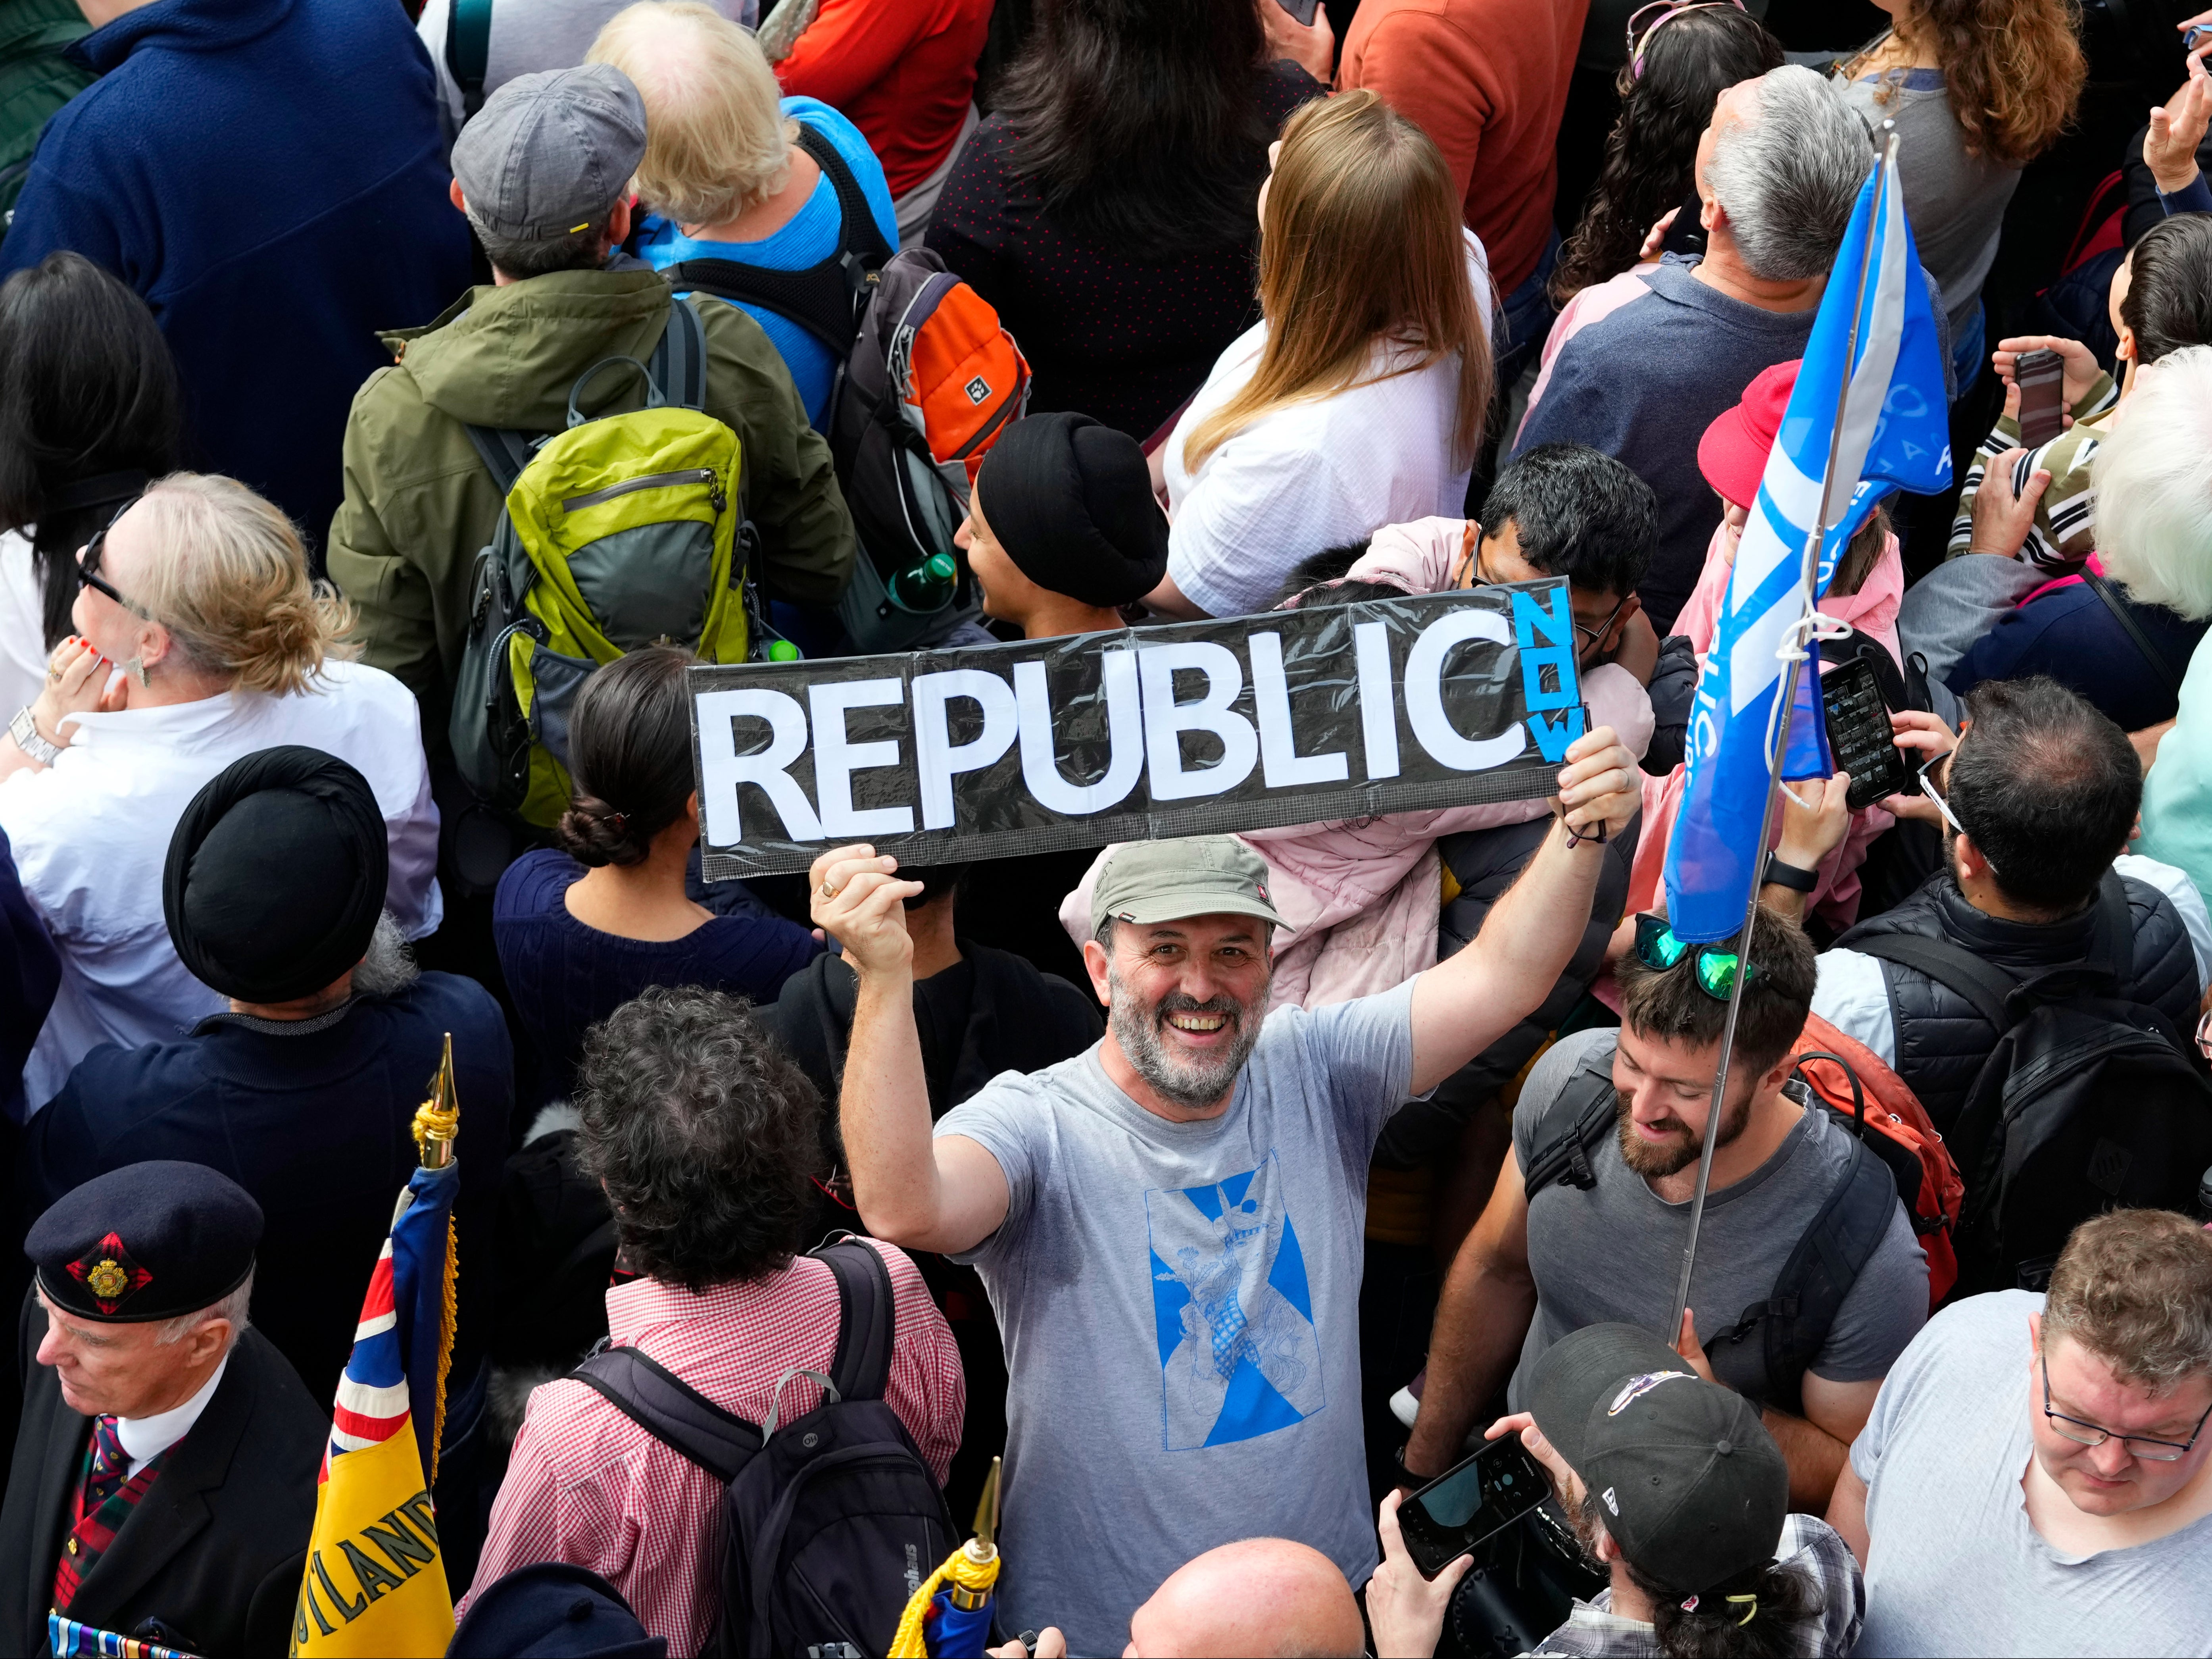 A man holds up a sign among members of the public attending a public Proclamation to announce the Accession of King Charles III, outside St Giles Cathedral, on the Royal Mile, in Edinburgh, Scotland, Sunday, Sept. 11, 2022